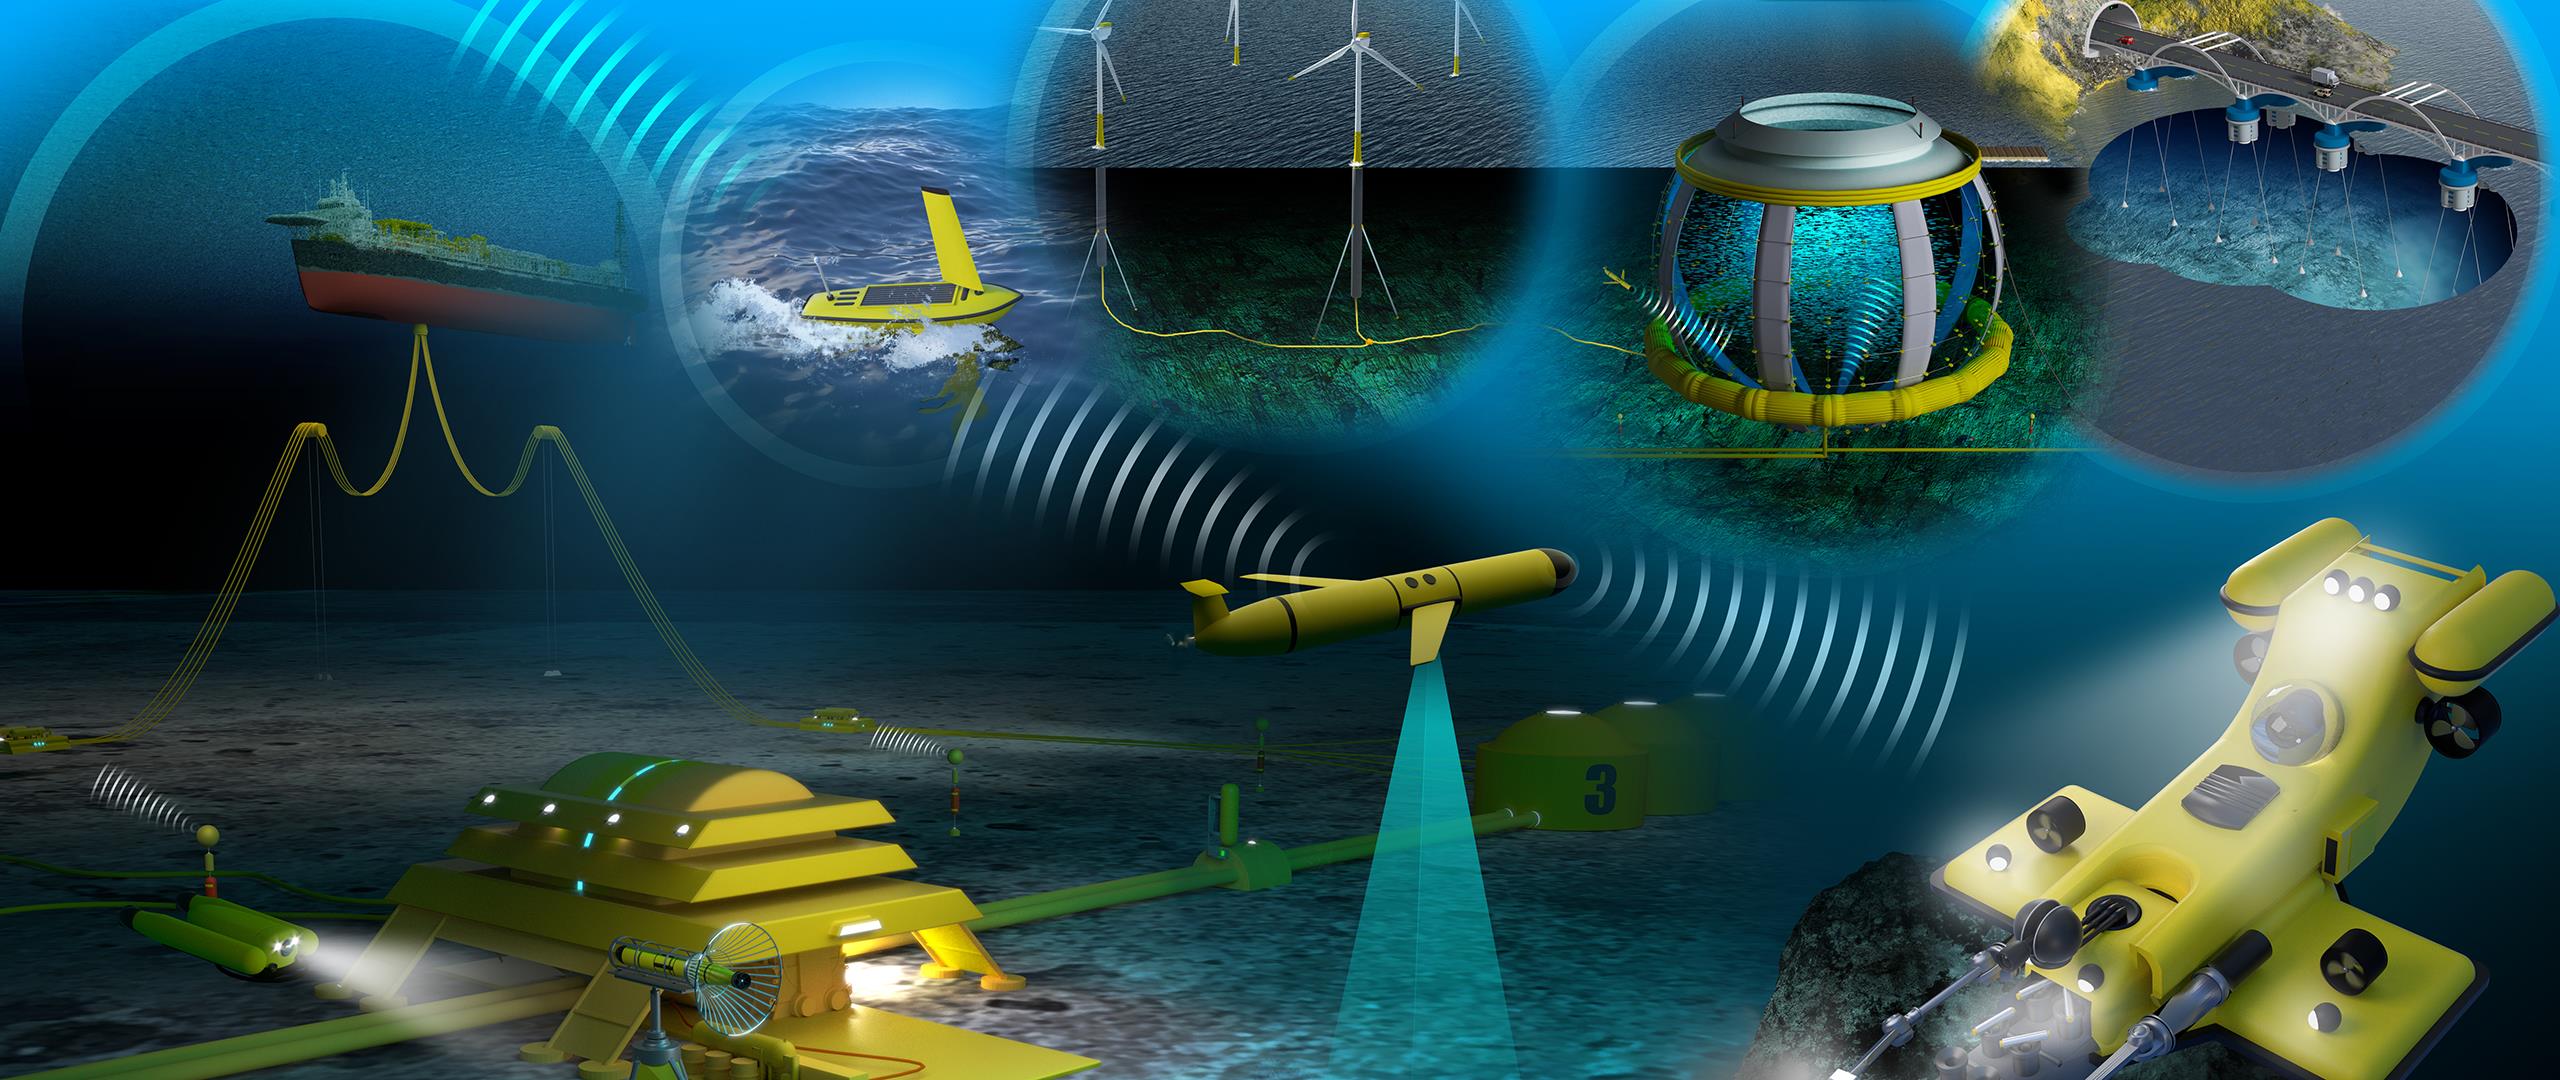 Illustration of technology for use under water.